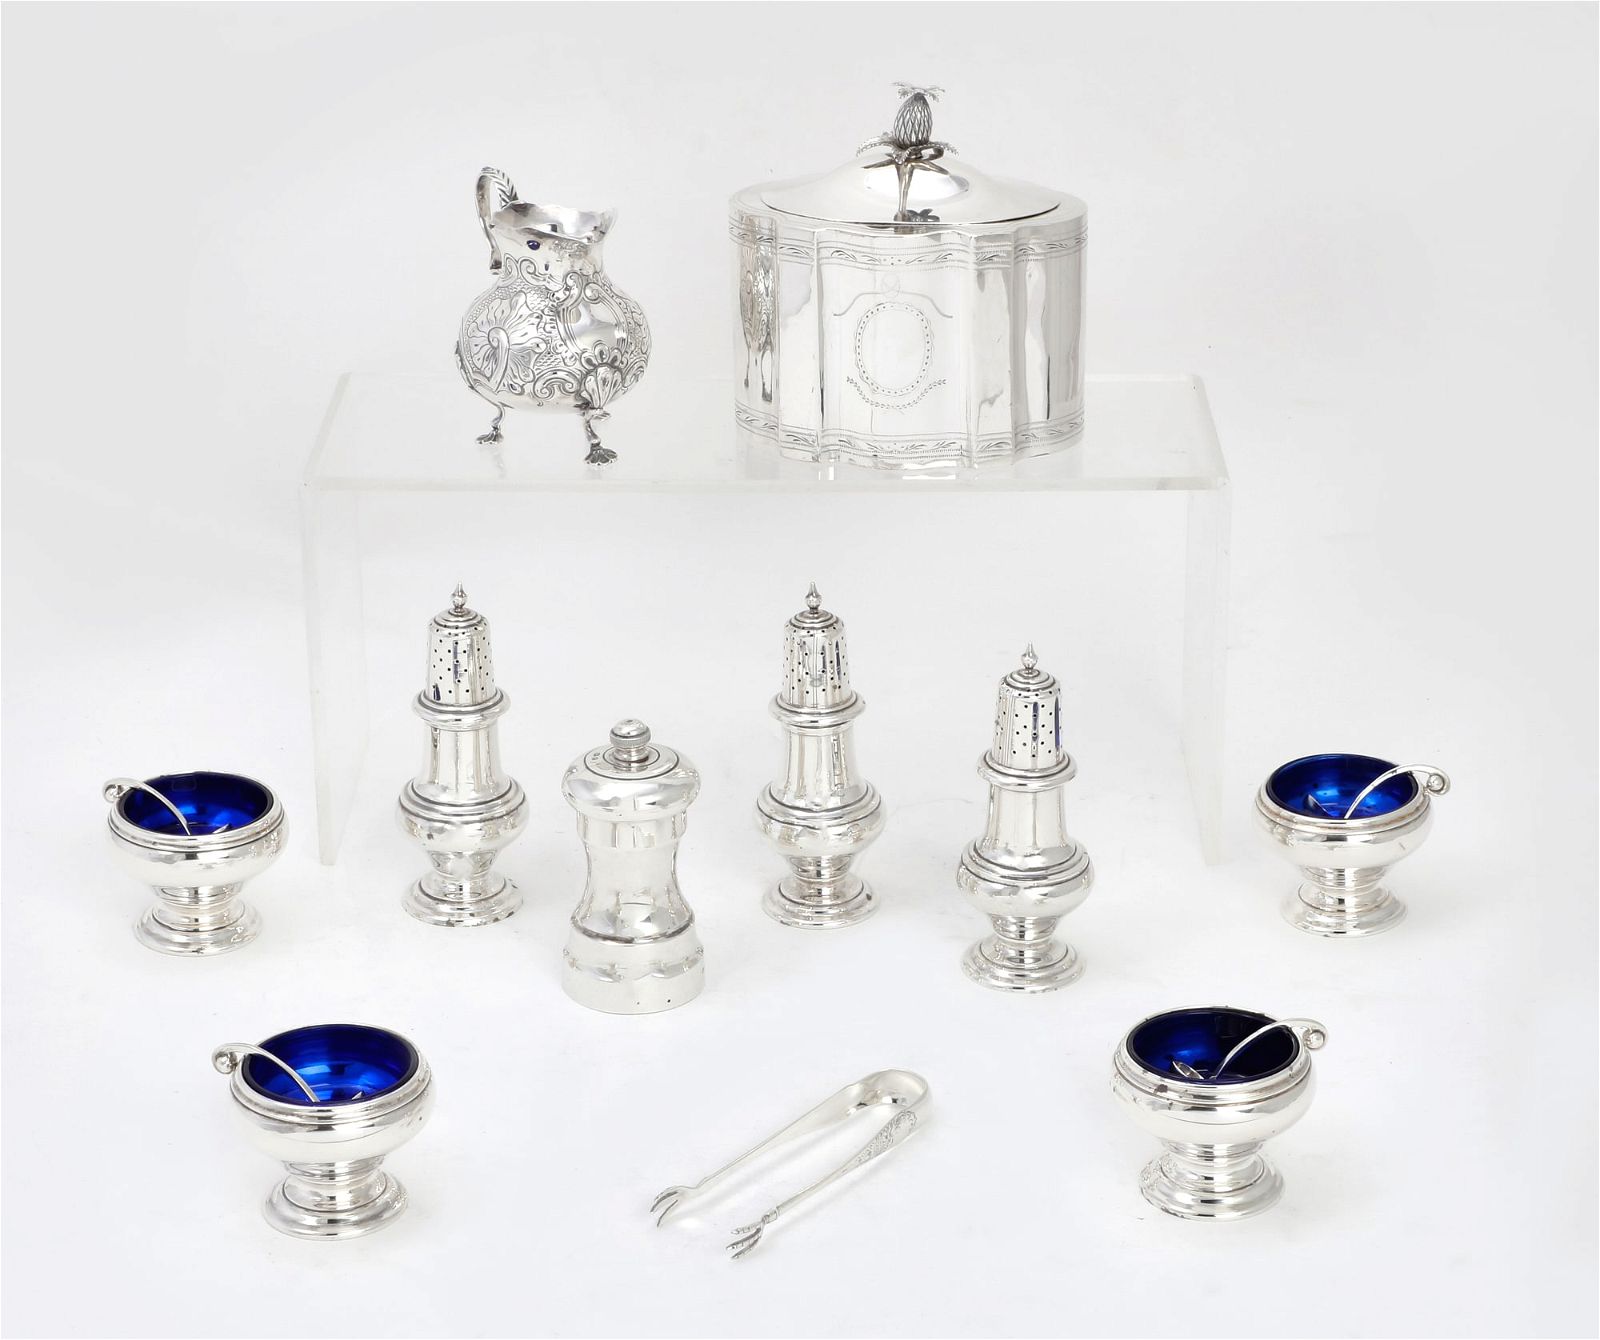 14 PIECE GROUP OF SILVER CONDIMENT